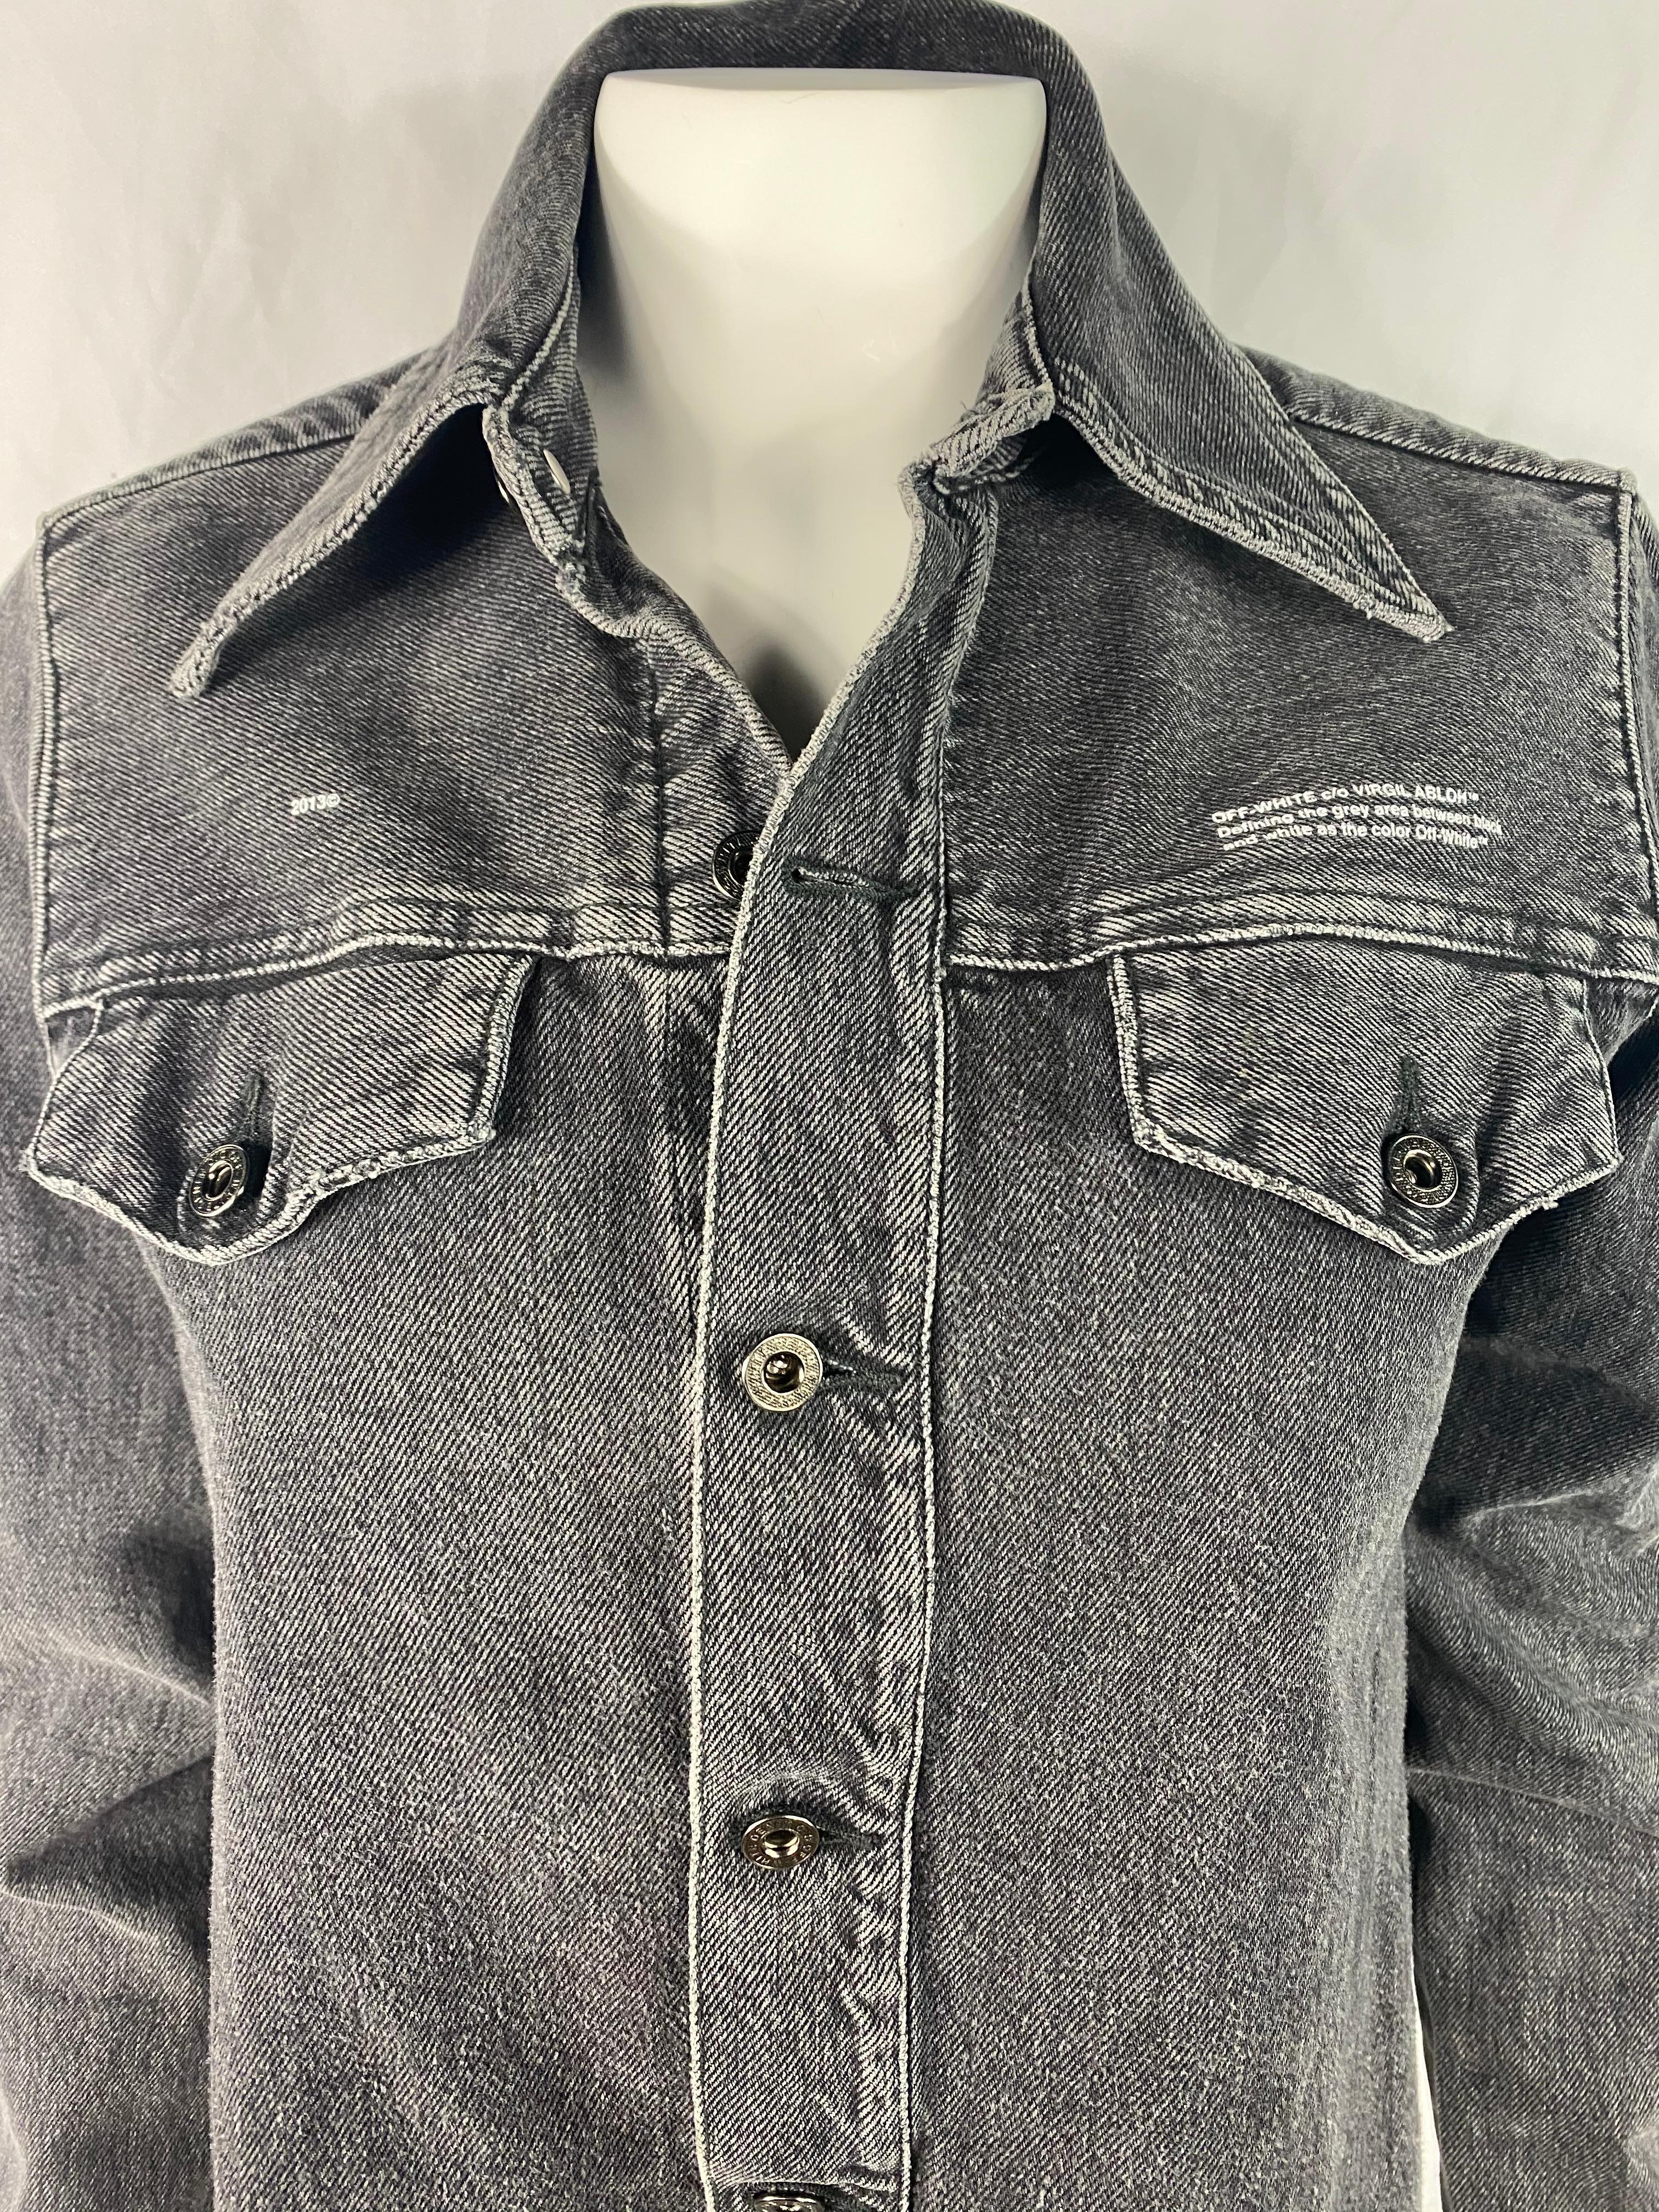 Product details:

The jacket features light grey wash, front  button down closure with dual front pockets and side slits. The front of the jacket is shorter than the back. The front measures 22 inches long and the back is 27.5 inches long.